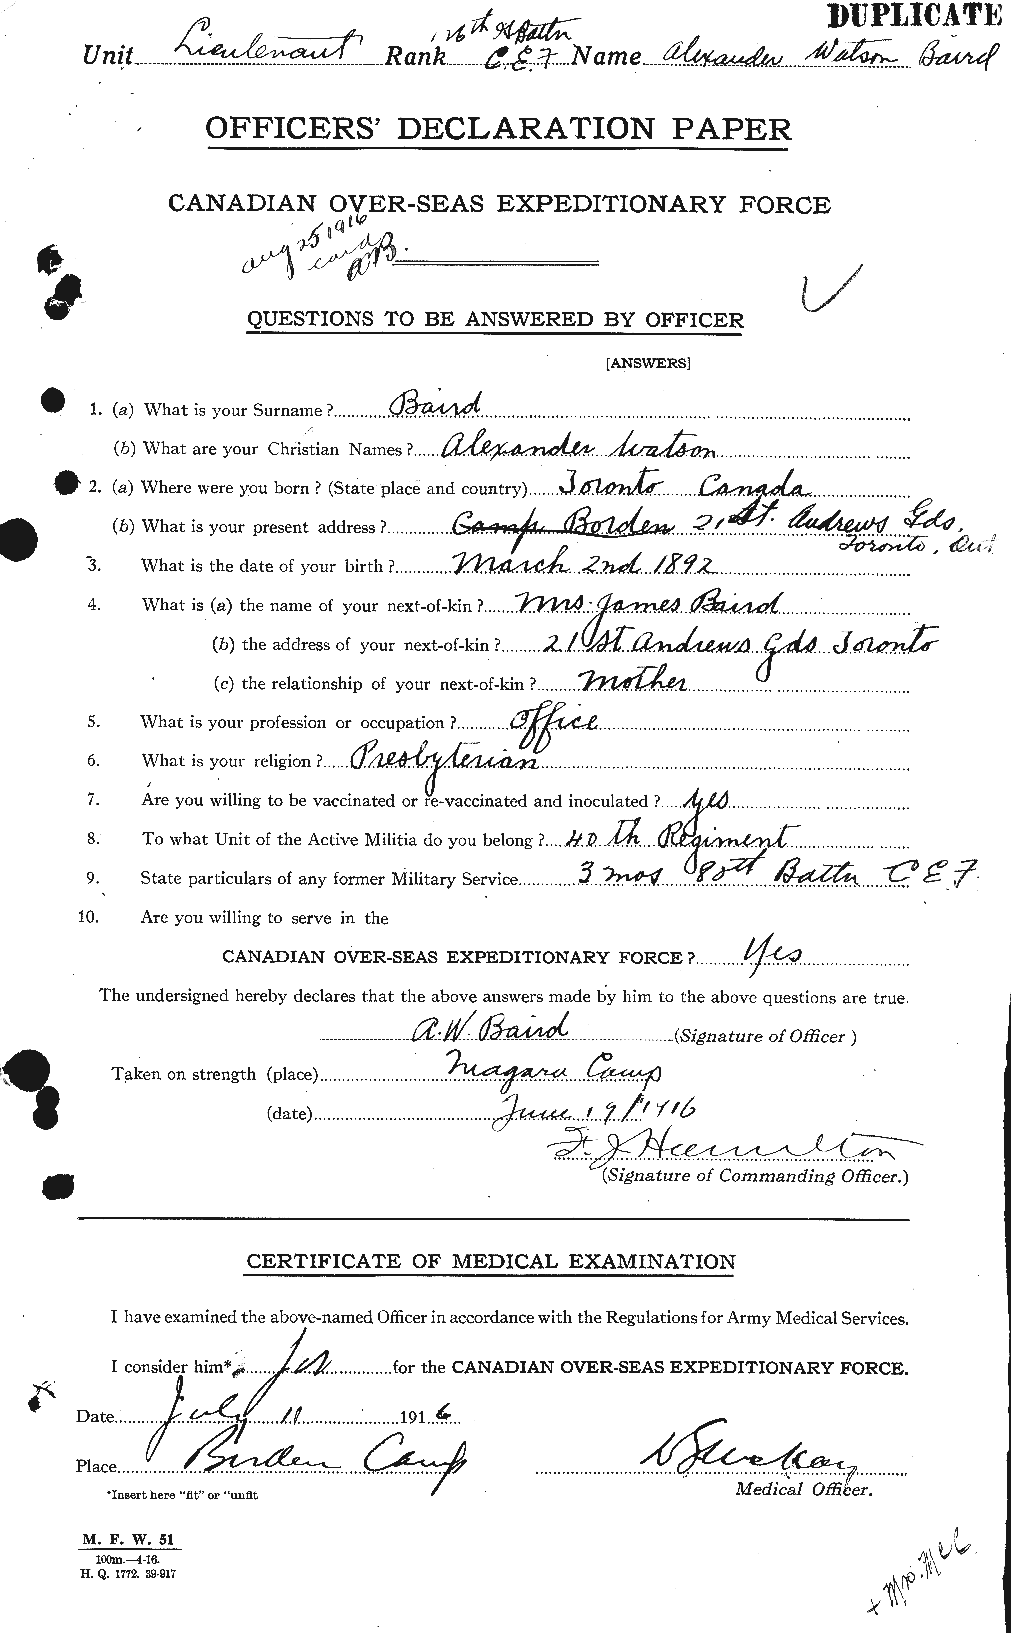 Personnel Records of the First World War - CEF 226736a